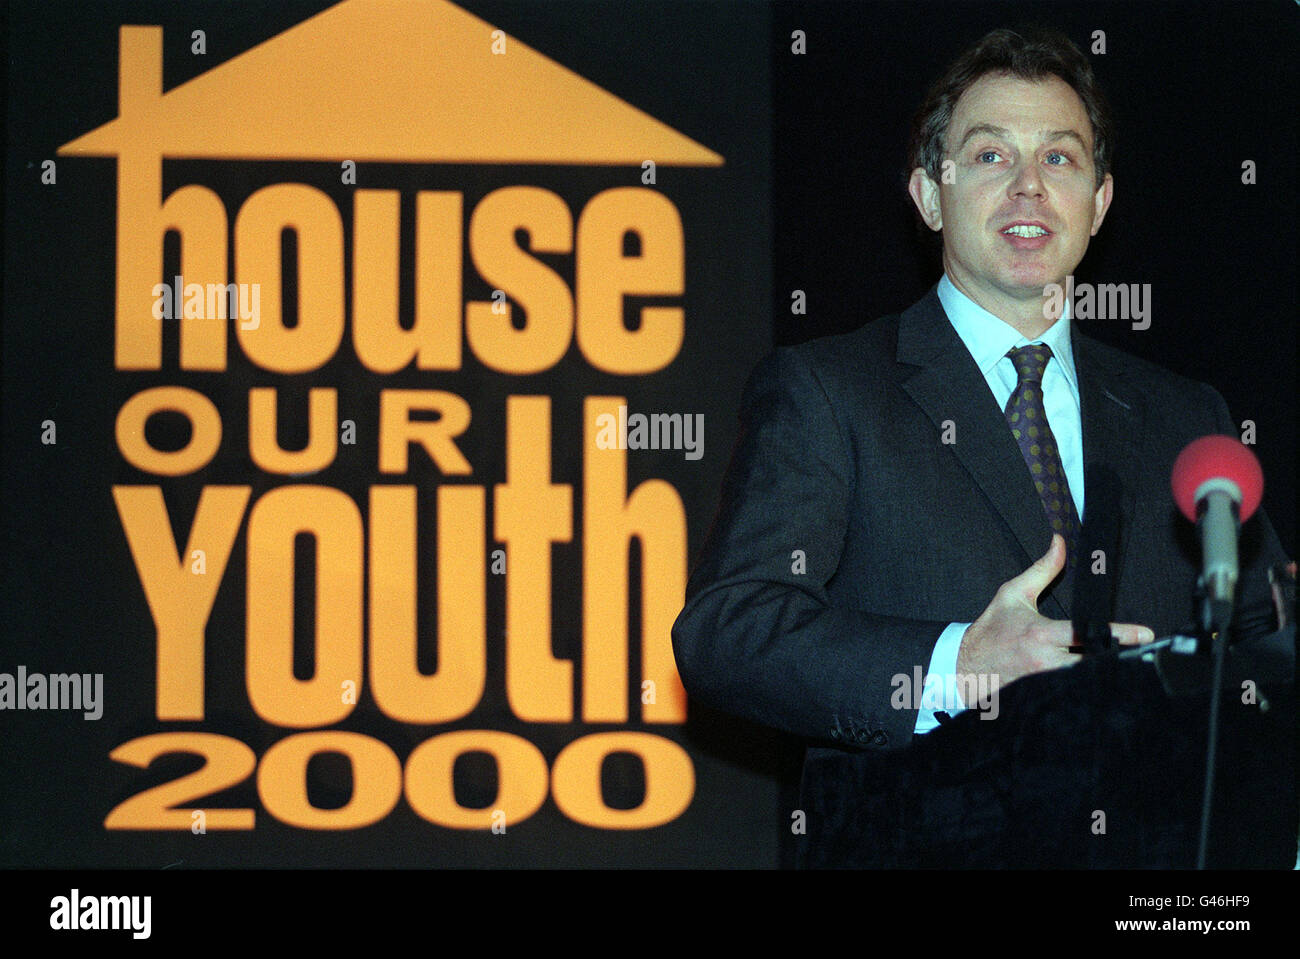 Labour leader Tony Blair addresses the audience at the launch of the NCH Action for Children's House Our Youth 2000 campaign at the Methodist Central Hall in Westminster, London, today (Mon). Photo by Neil Munns/PA. Stock Photo